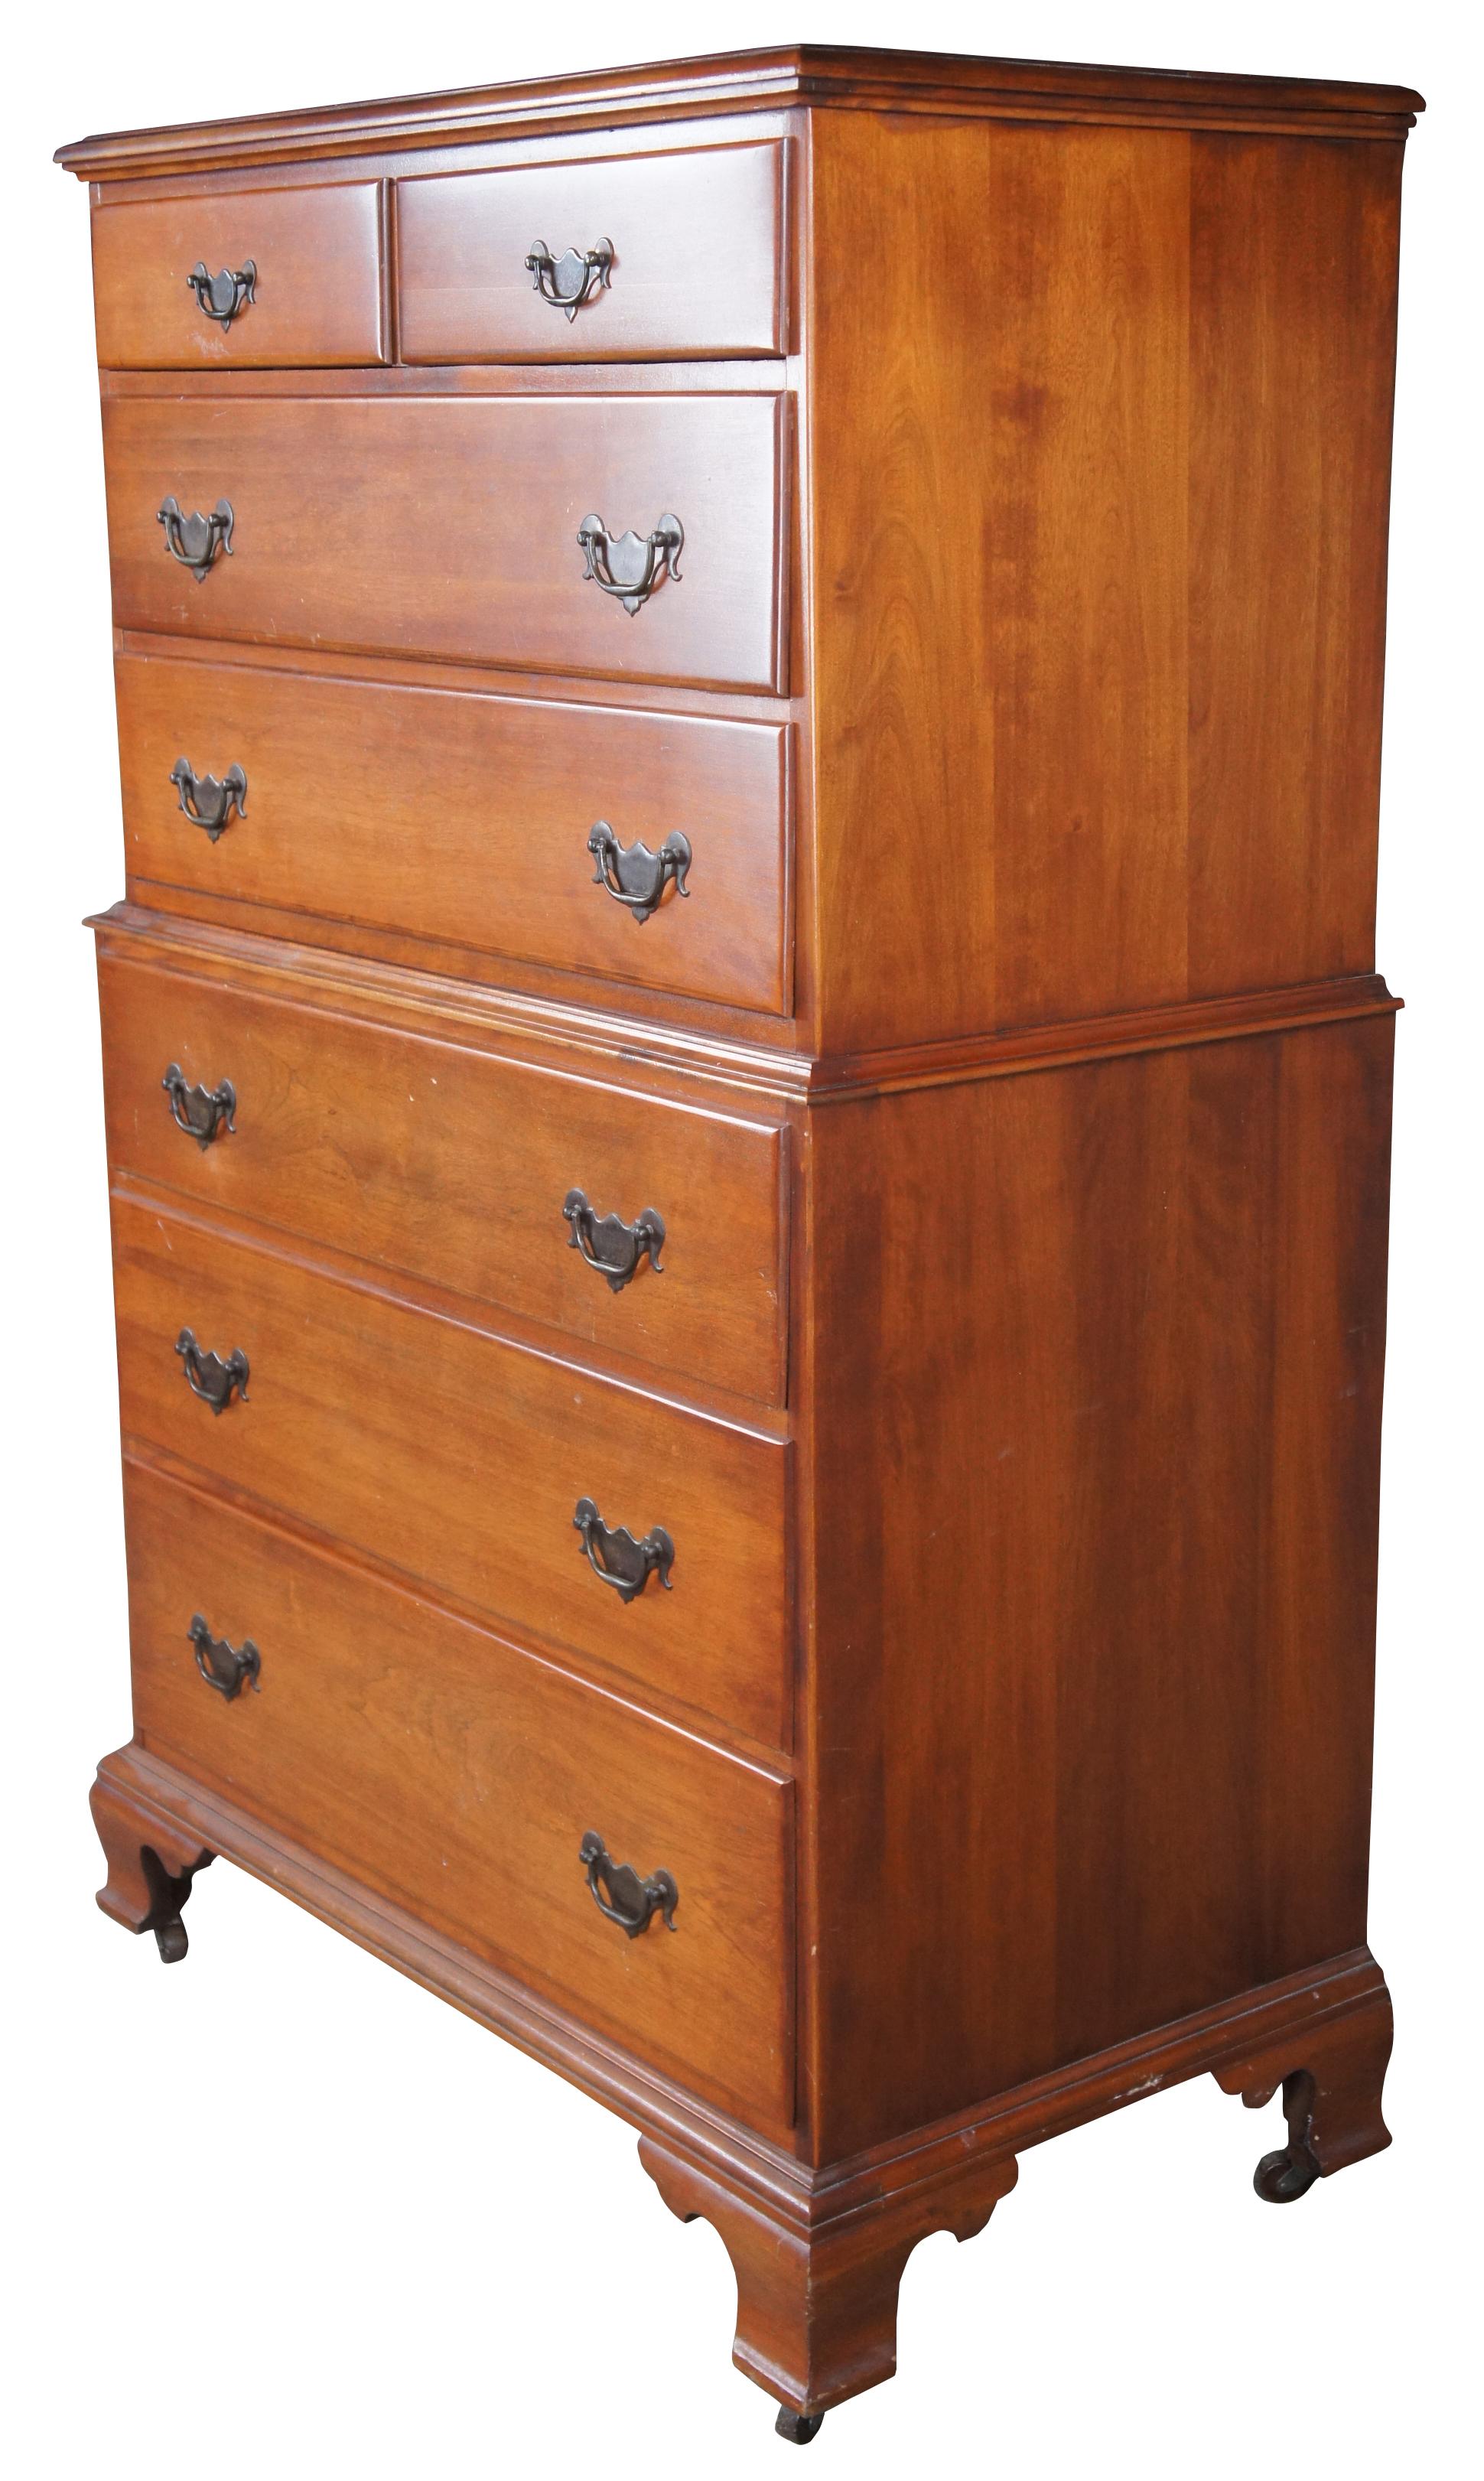 Antique Lammerts Furniture tallboy chest of drawers or dresser. Made of maple featuring seven drawers with Chippendale styling, brass hardware and bracket feet with castors.

Lammerts, Furnishings of Character, Saint Louis. The Lammert Furniture